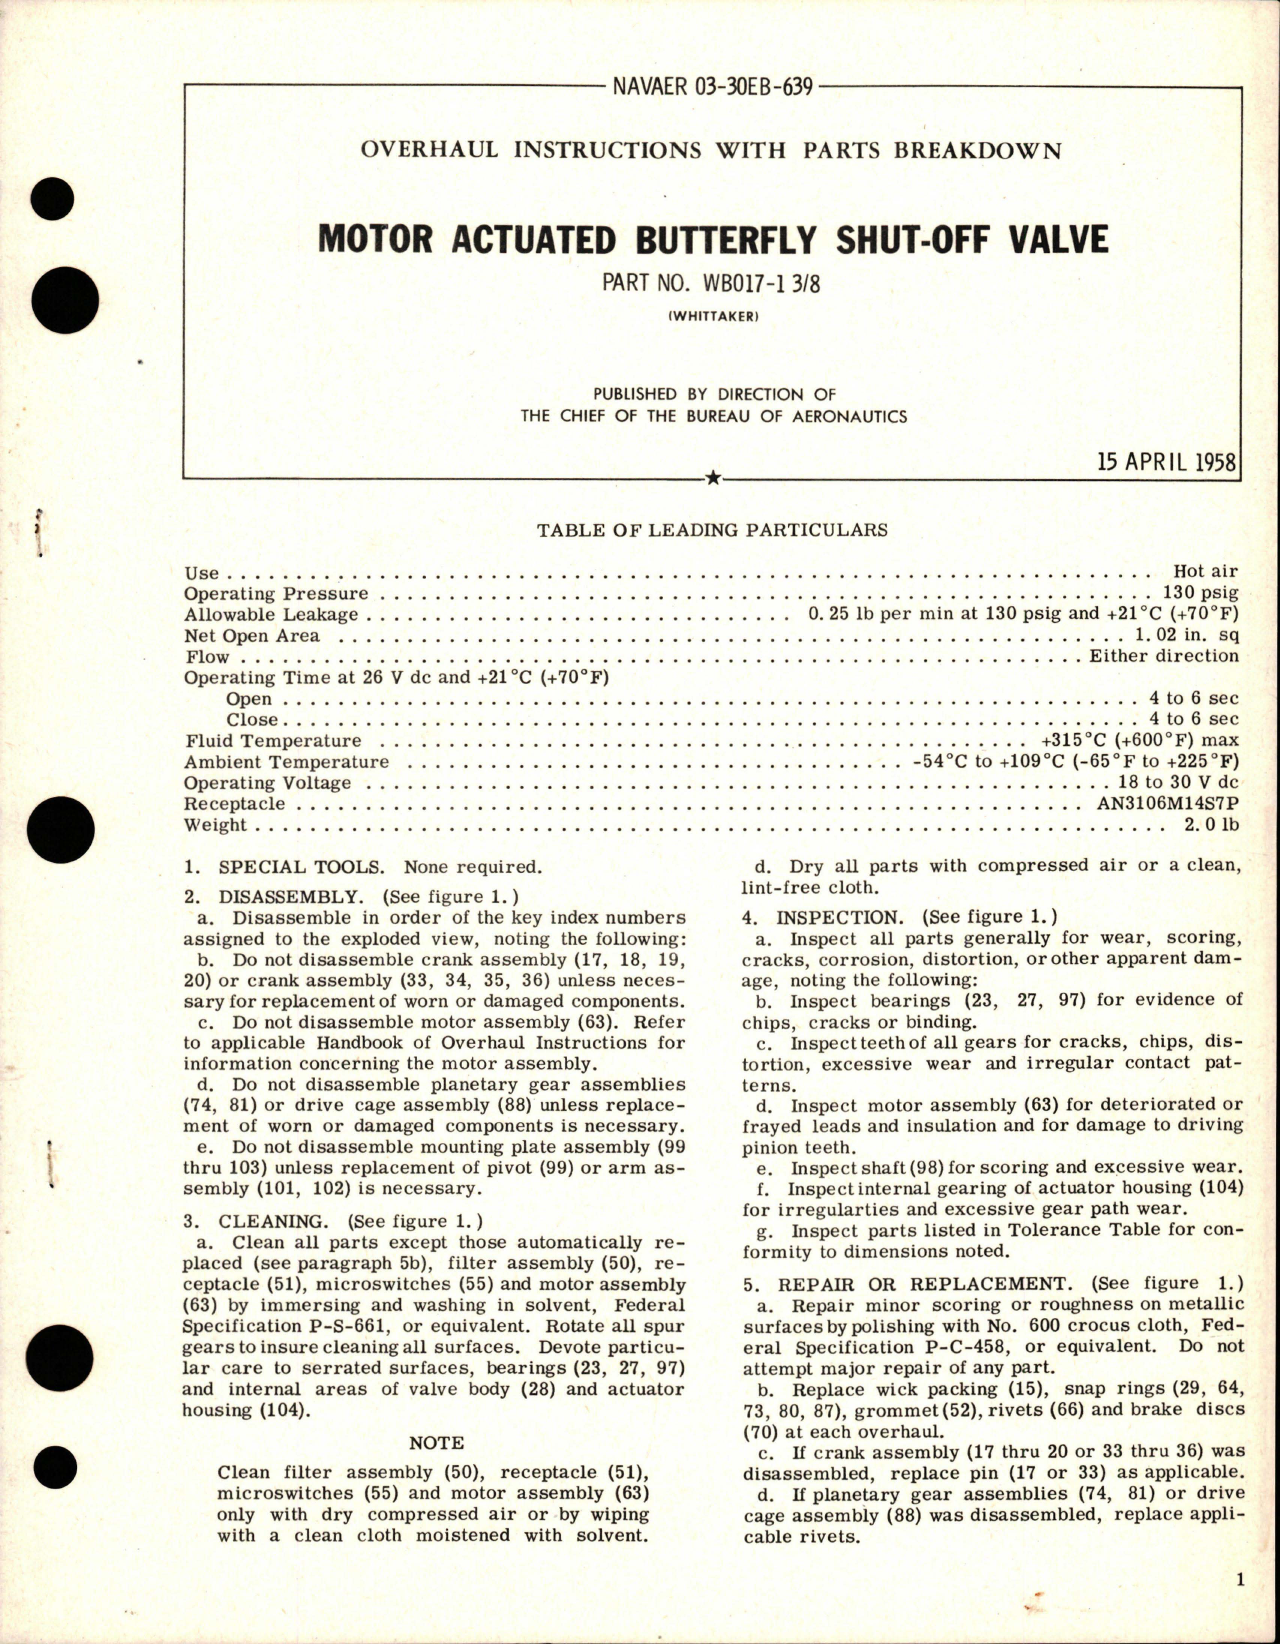 Sample page 1 from AirCorps Library document: Overhaul Instructions with Parts for Motor Actuated Butterfly Shut Off Valve - Part WB017-1 3/8